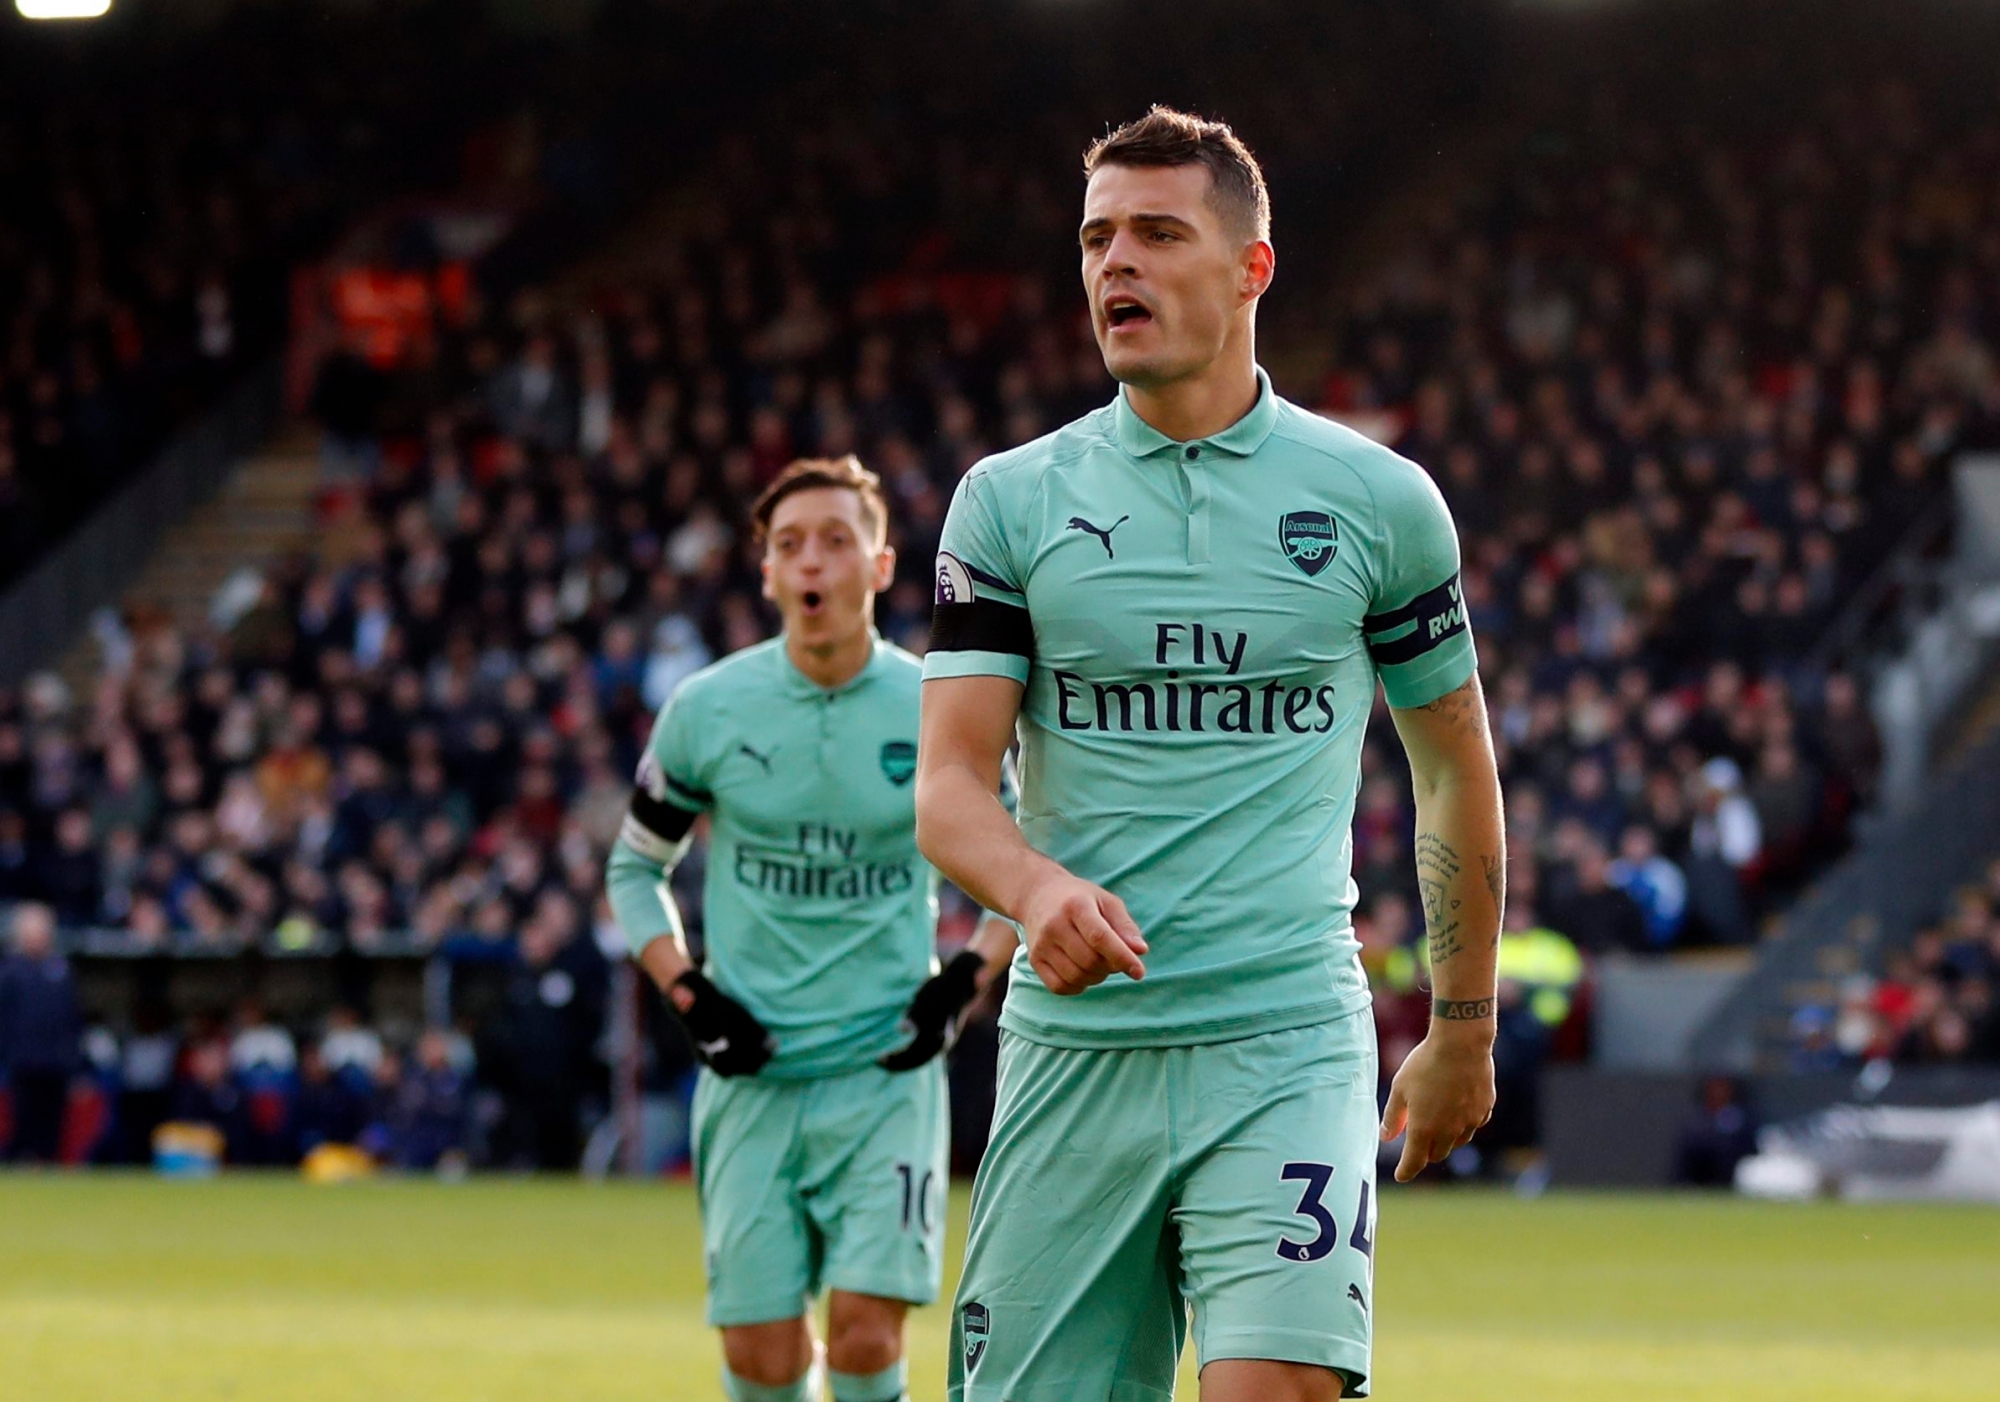 Arsenal's Granit Xhaka celebrates after scoring his side's first goal of the game during the English Premier League soccer match between Crystal Palace and Arsenal at Selhurst Park, London, Sunday, Oct. 28, 2018. (AP Photo/Frank Augstein) Britain Soccer Premier League